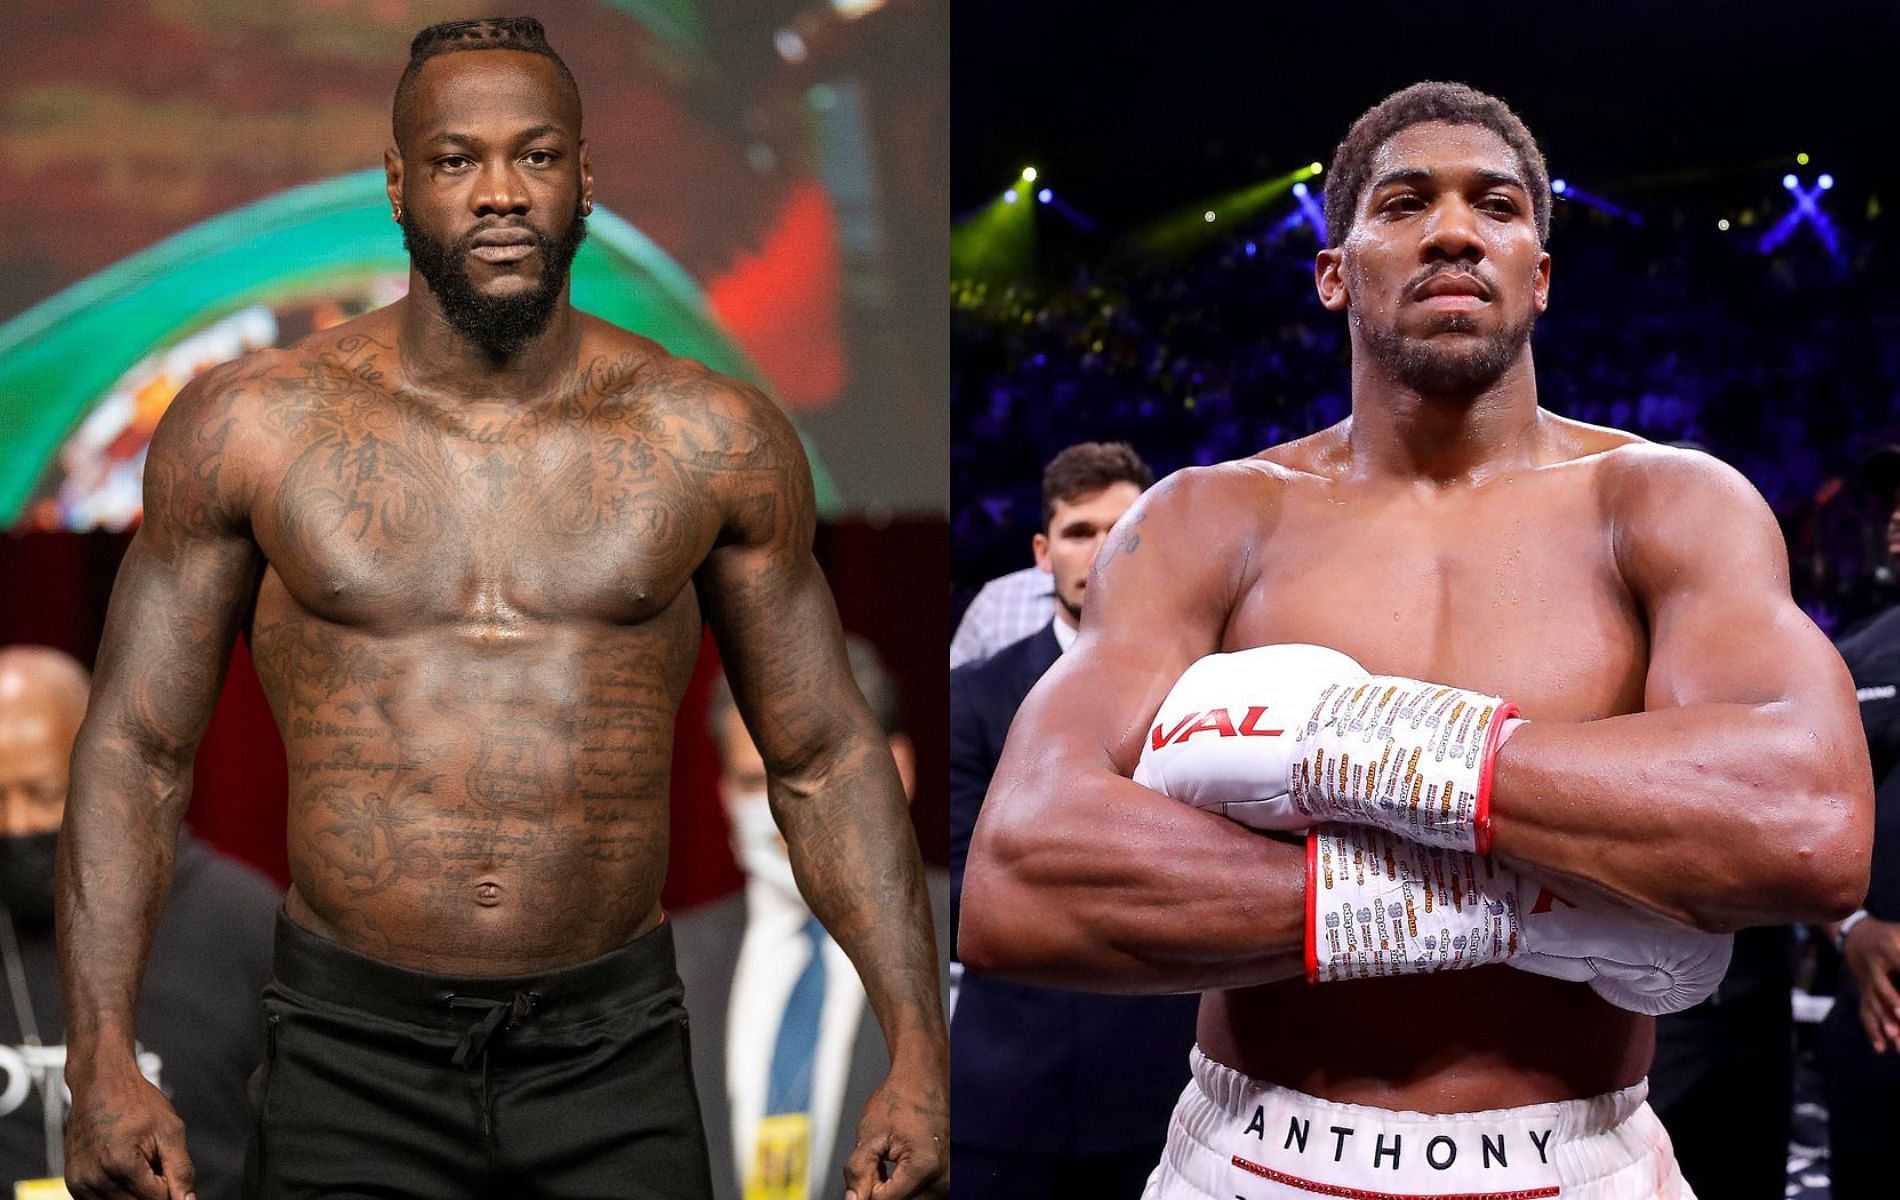 Deontay Wilder (left) and Anthony Joshua (right)